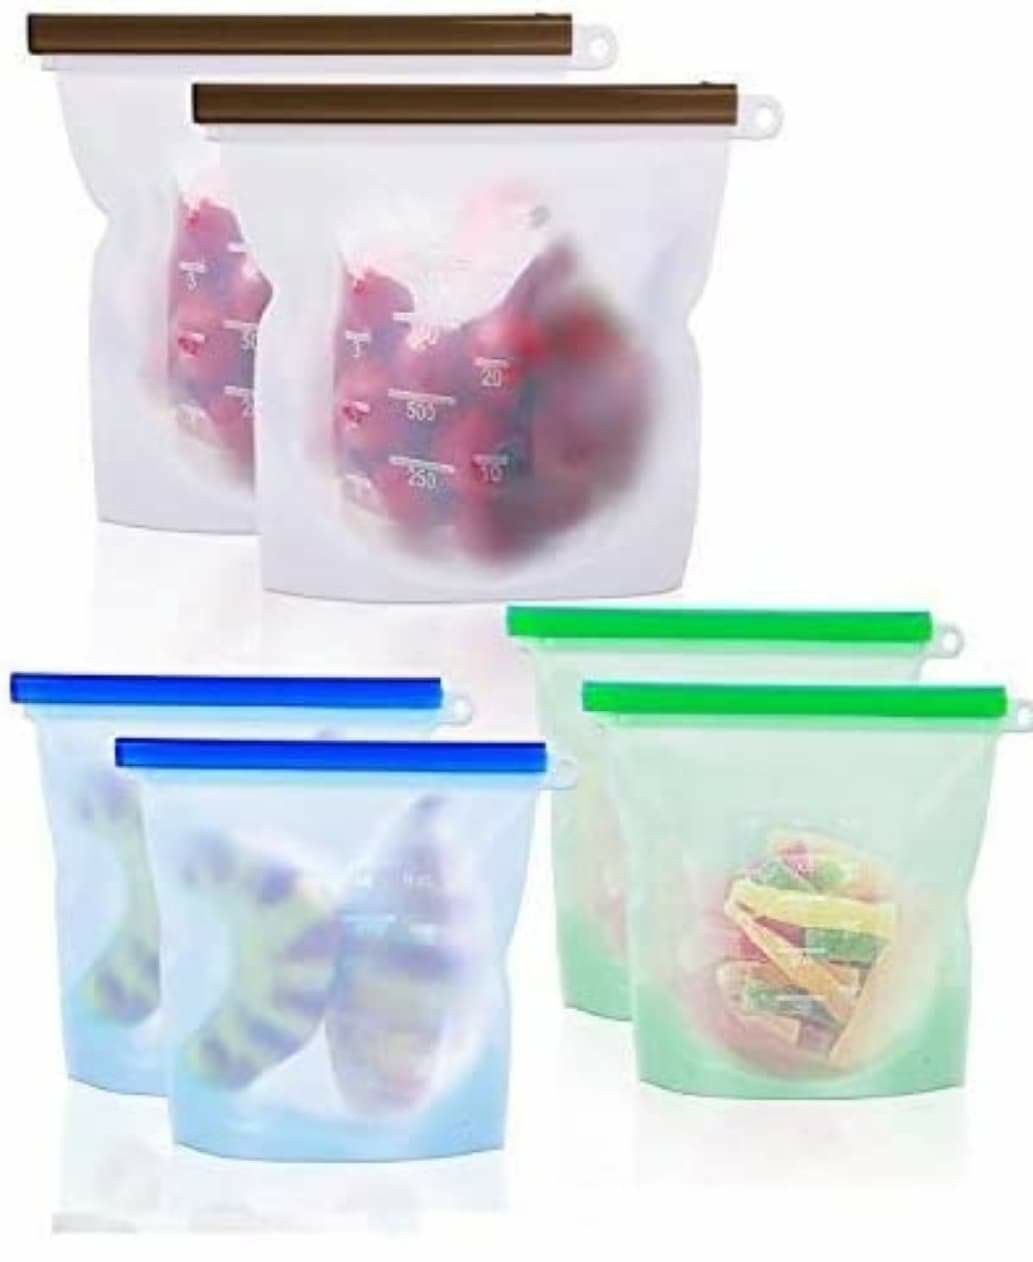 Reusable Silicone Food Storage Bags (Set of 6), NovoLido Leakproof Food Container Bags for Sandwich Vegetable and Liquid, FDA Approved Food Grade